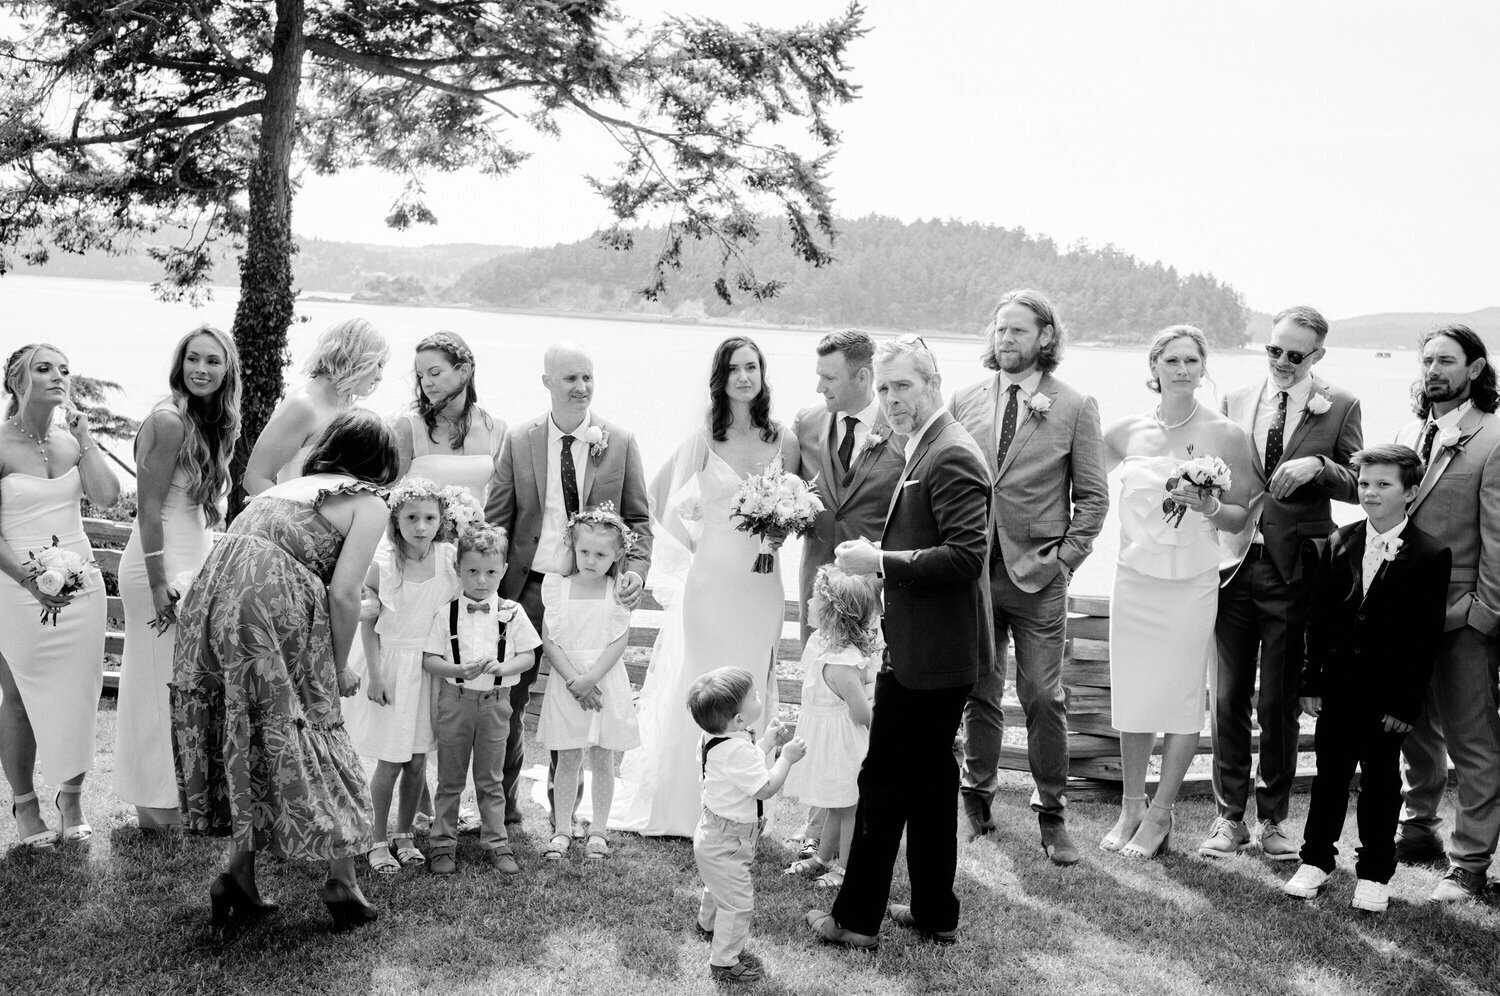 Chaotic scene of the wedding party arranging themselves for the family portrait